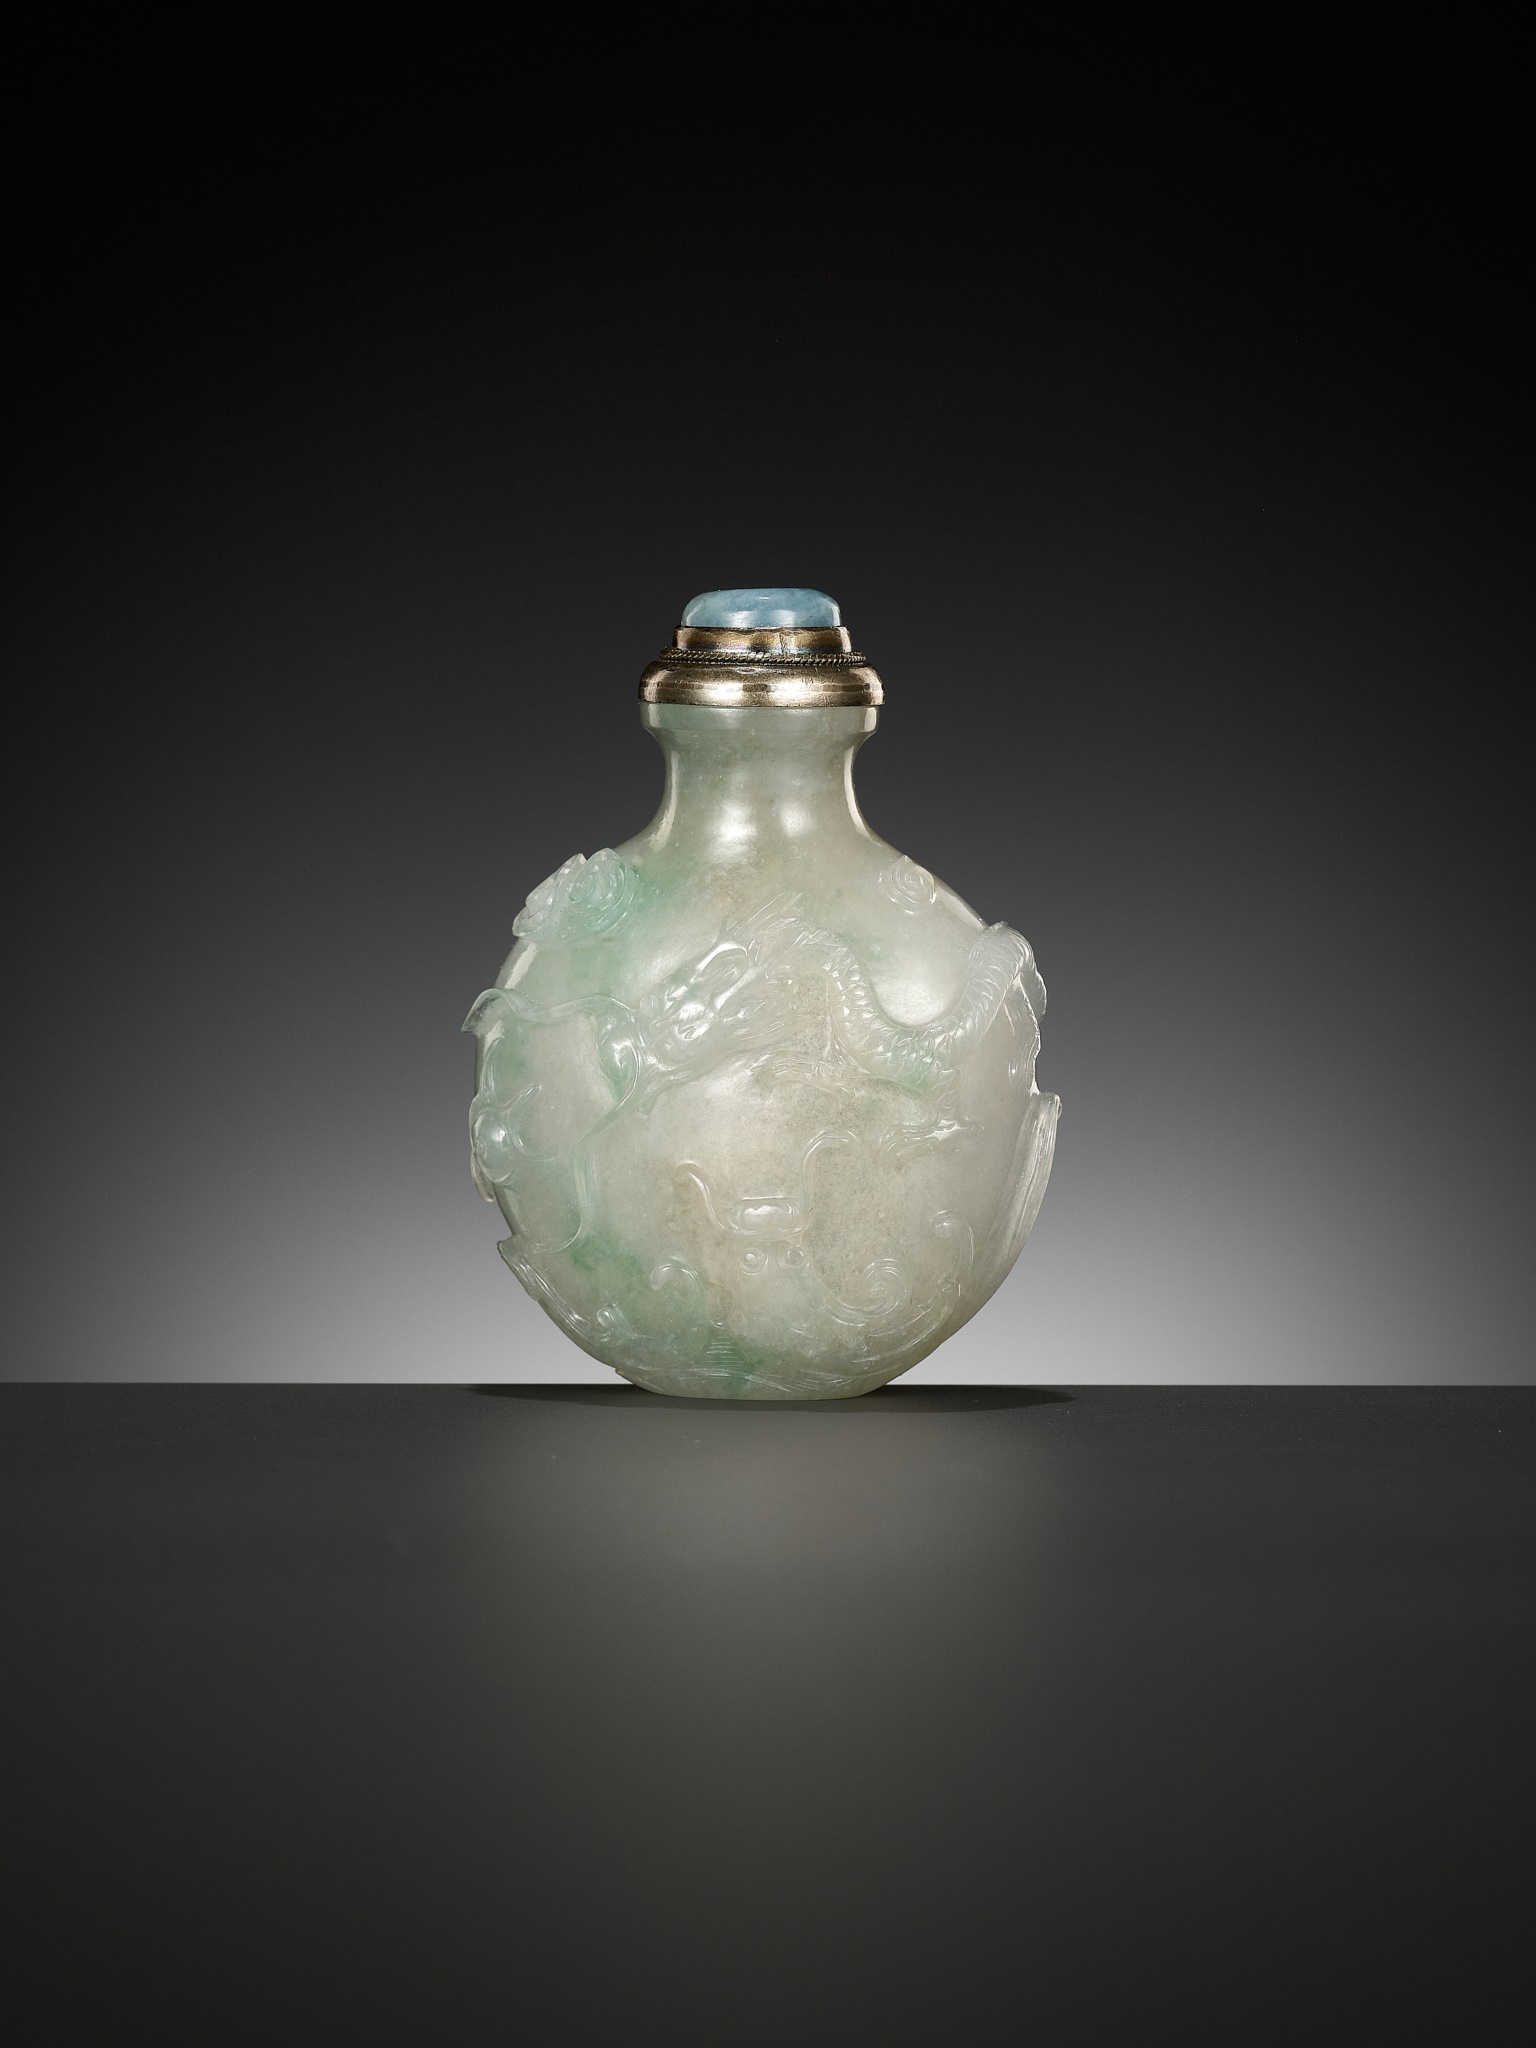 A JADEITE SNUFF BOTTLE DEPICTING A CARP TRANSFORMING INTO A DRAGON, CHINA, 1770-1850 - Image 9 of 15